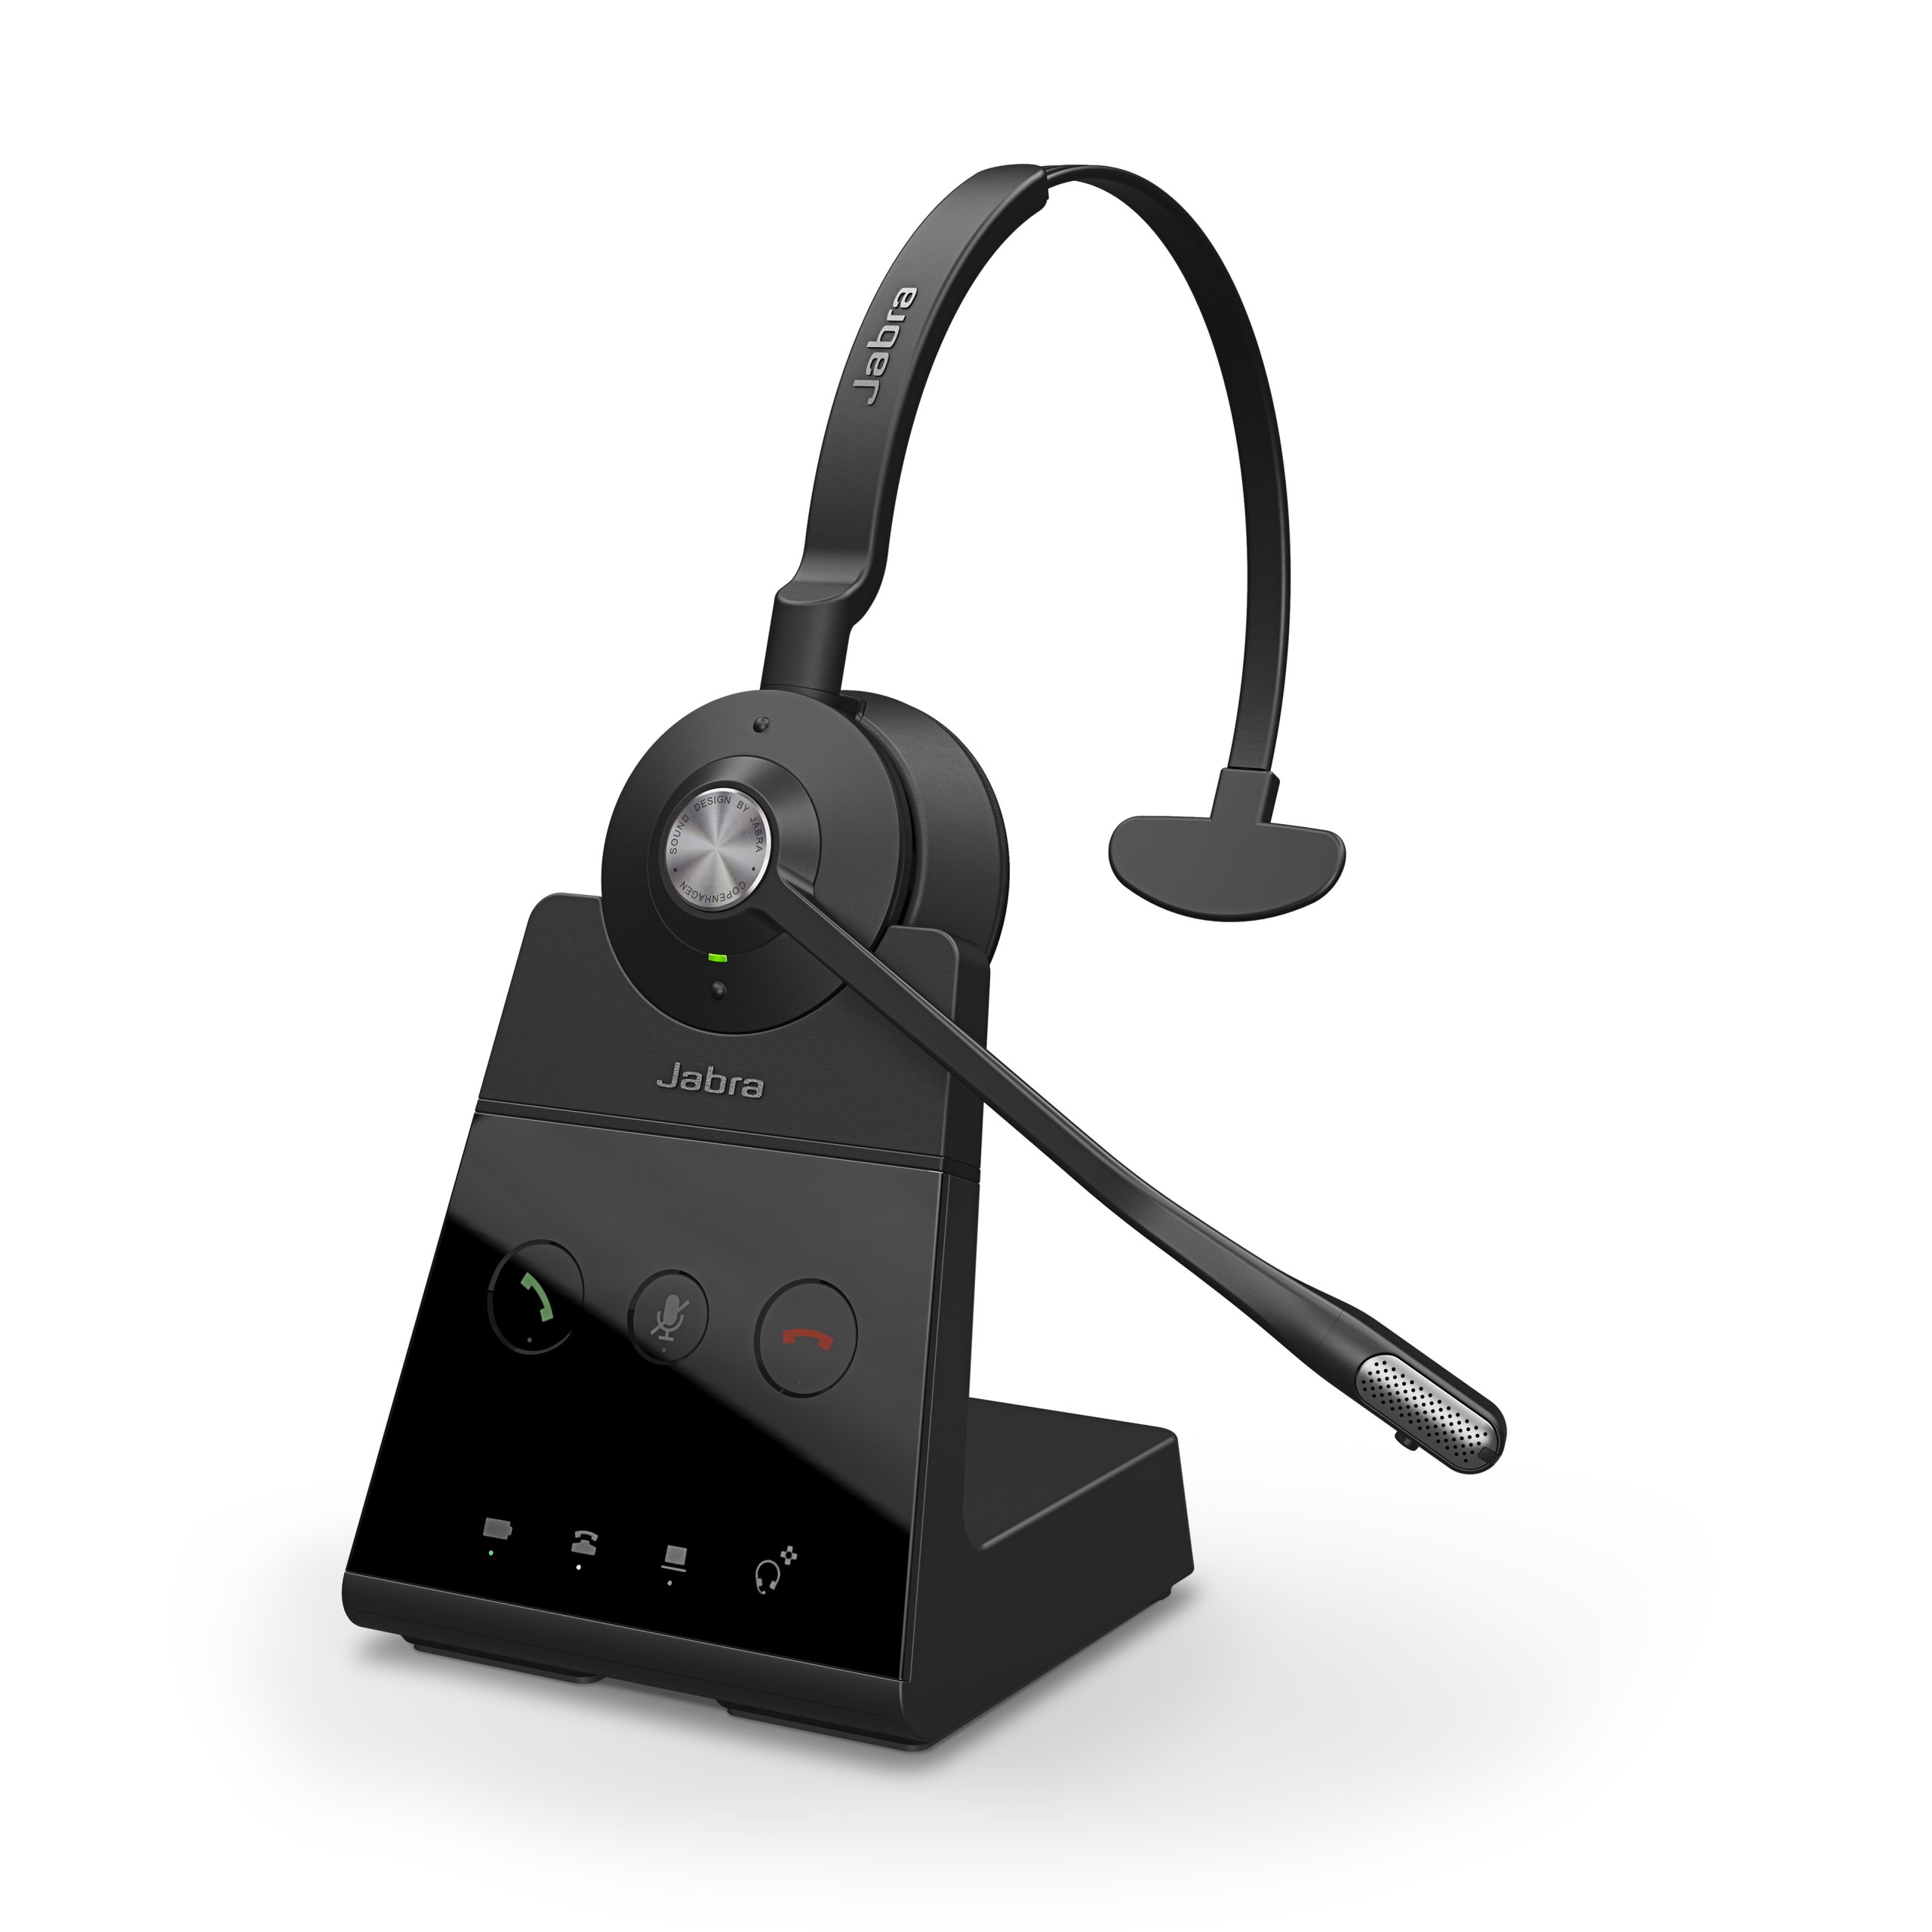 DECT WIreless Headsets - Communication and Collaboration Solutions